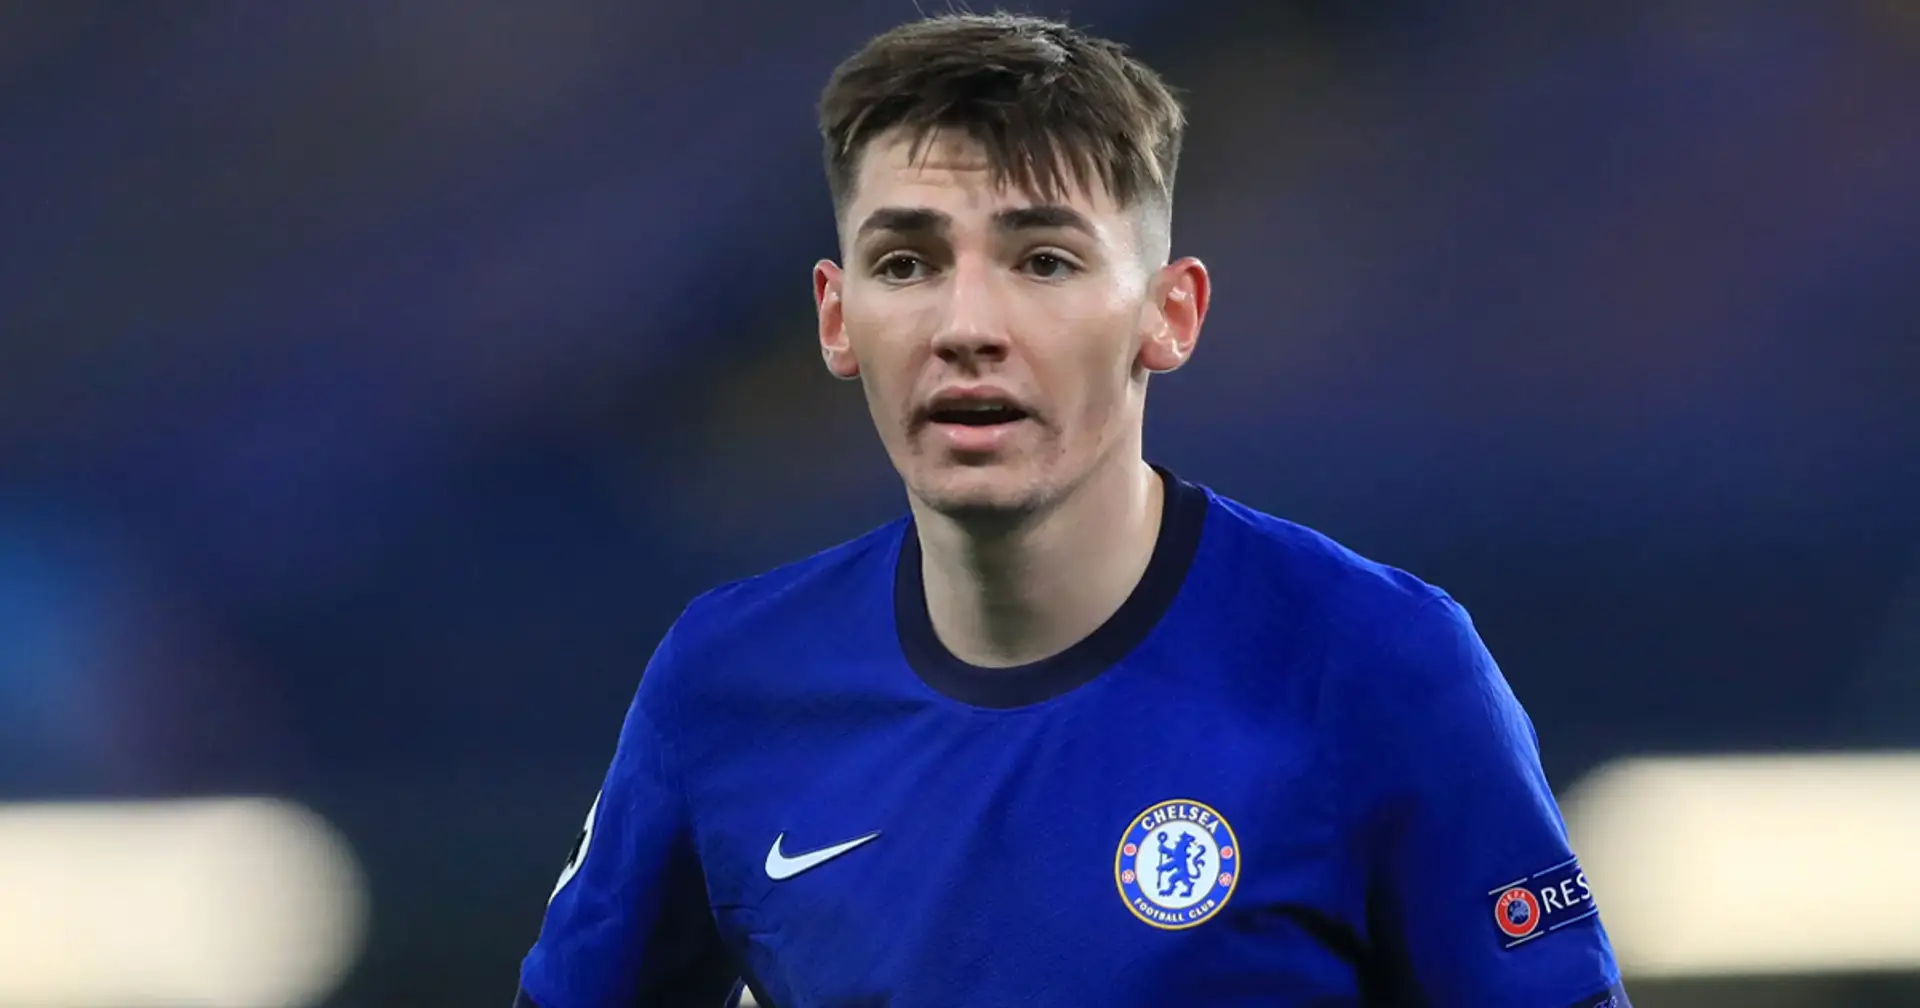 Billy Gilmour set for medical ahead of Norwich loan move this week - Sky Sports (reliability: 4 stars)